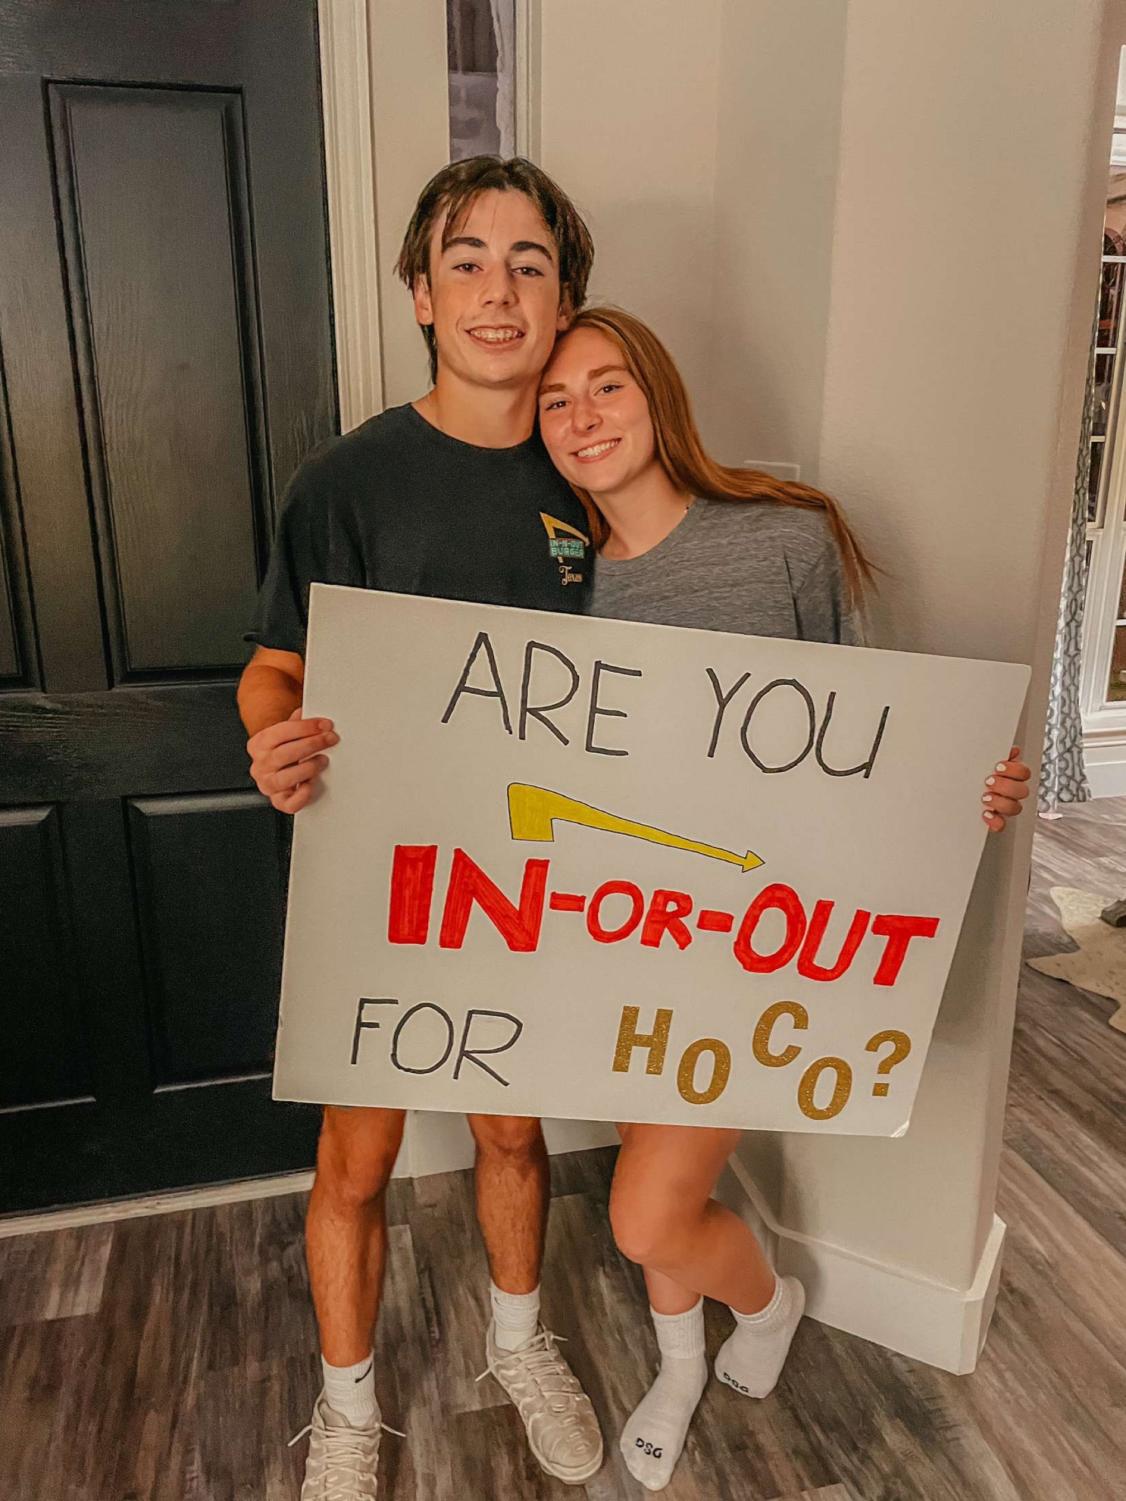 Back+to+the+Future+Homecoming+Proposals